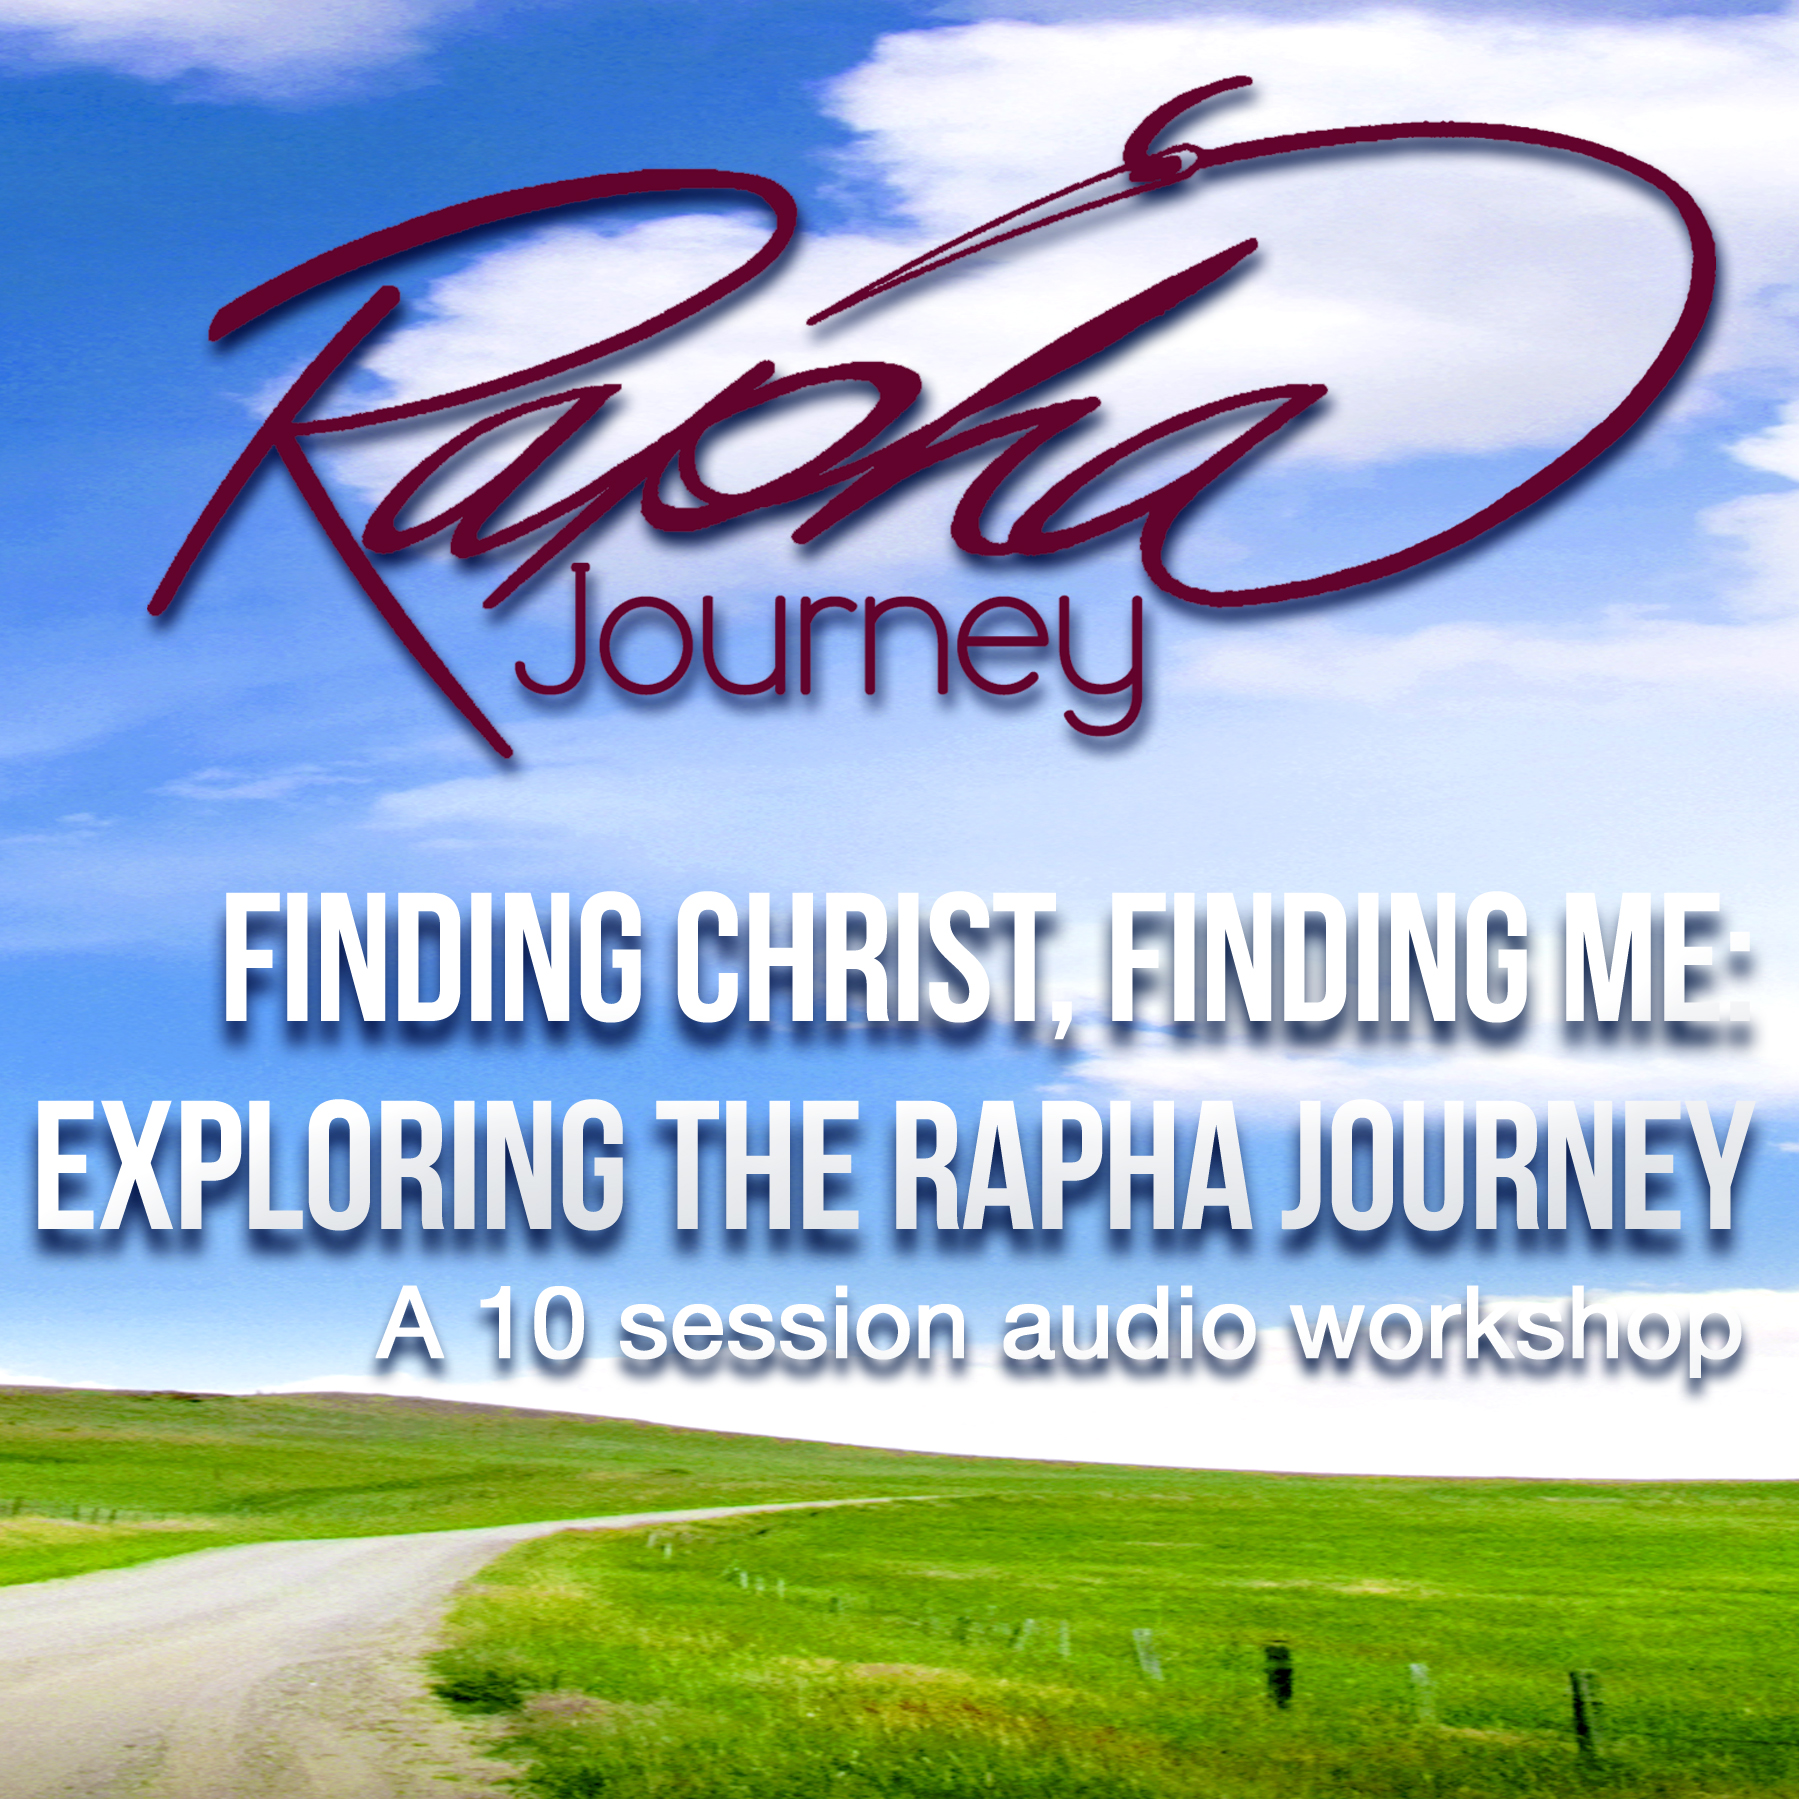 Finding Christ, Finding Me: Exploring the Rapha Journey